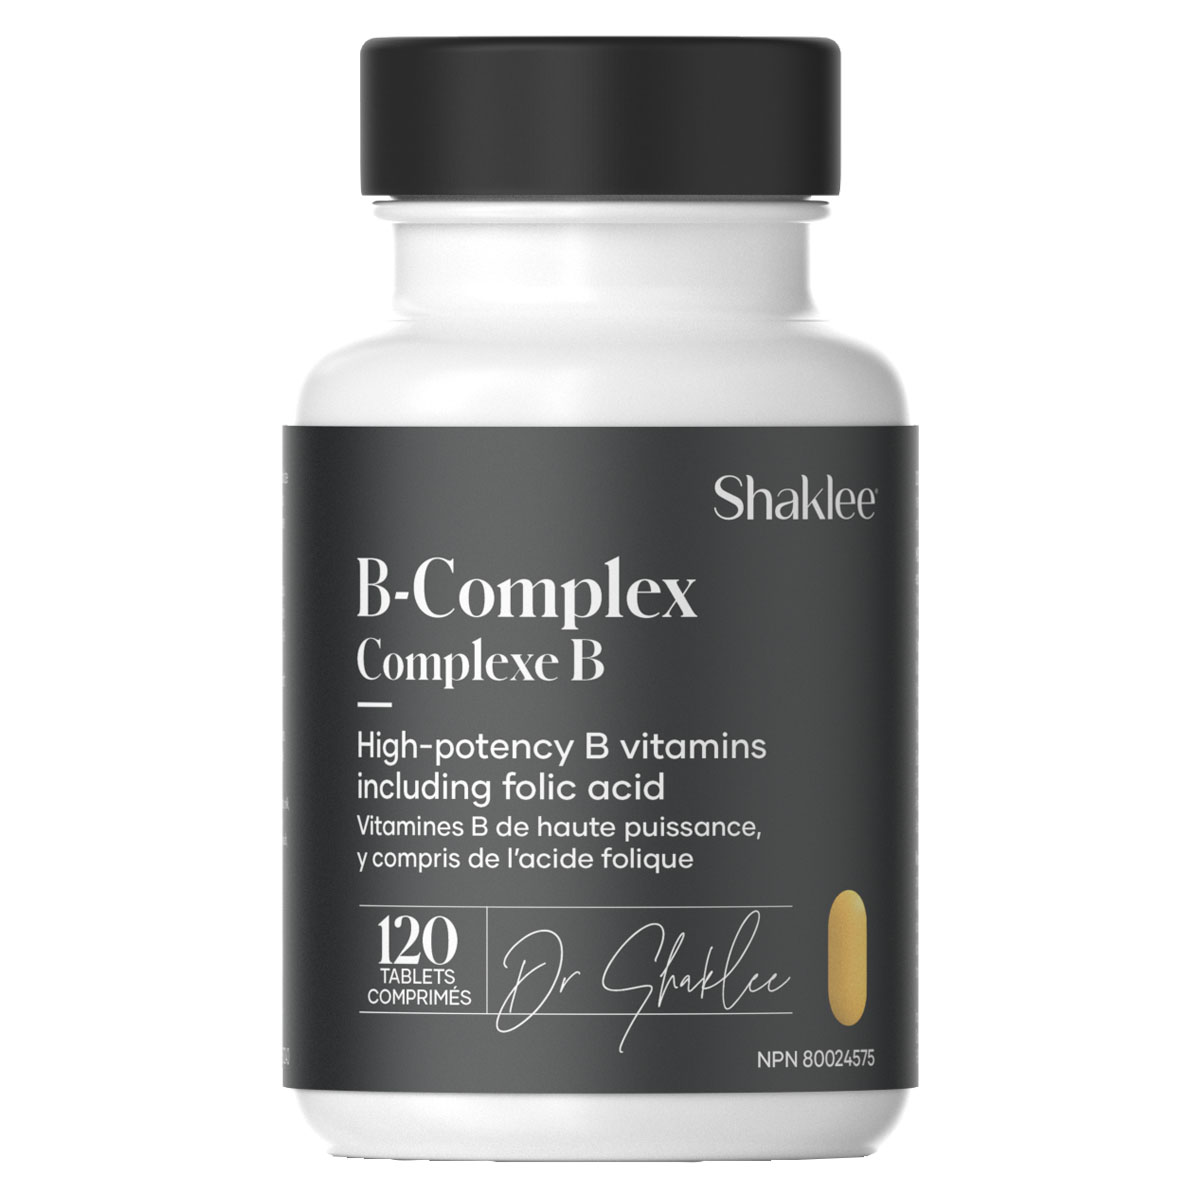 B-Complex, Vitamins and Minerals, Essential Nutrition, Nutrition